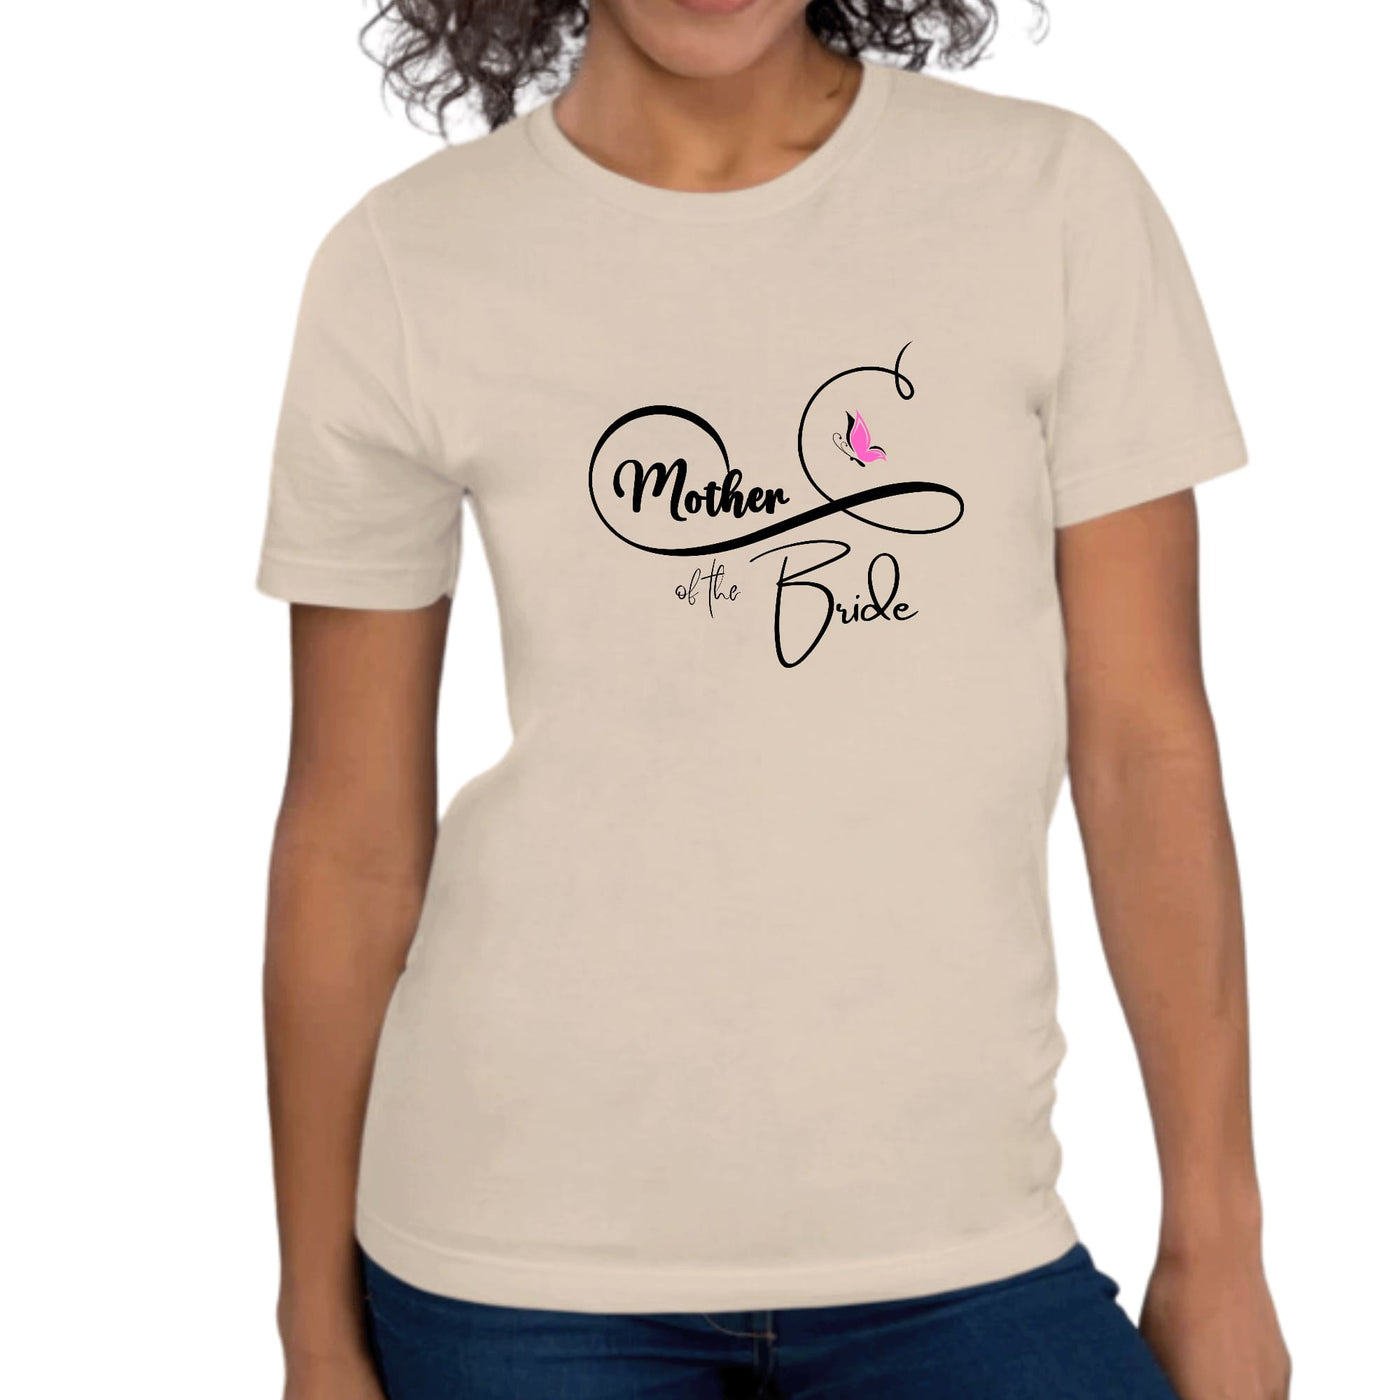 Womens Graphic T - shirt Mother Of The Bride - Wedding Bridal Pink | T - Shirts